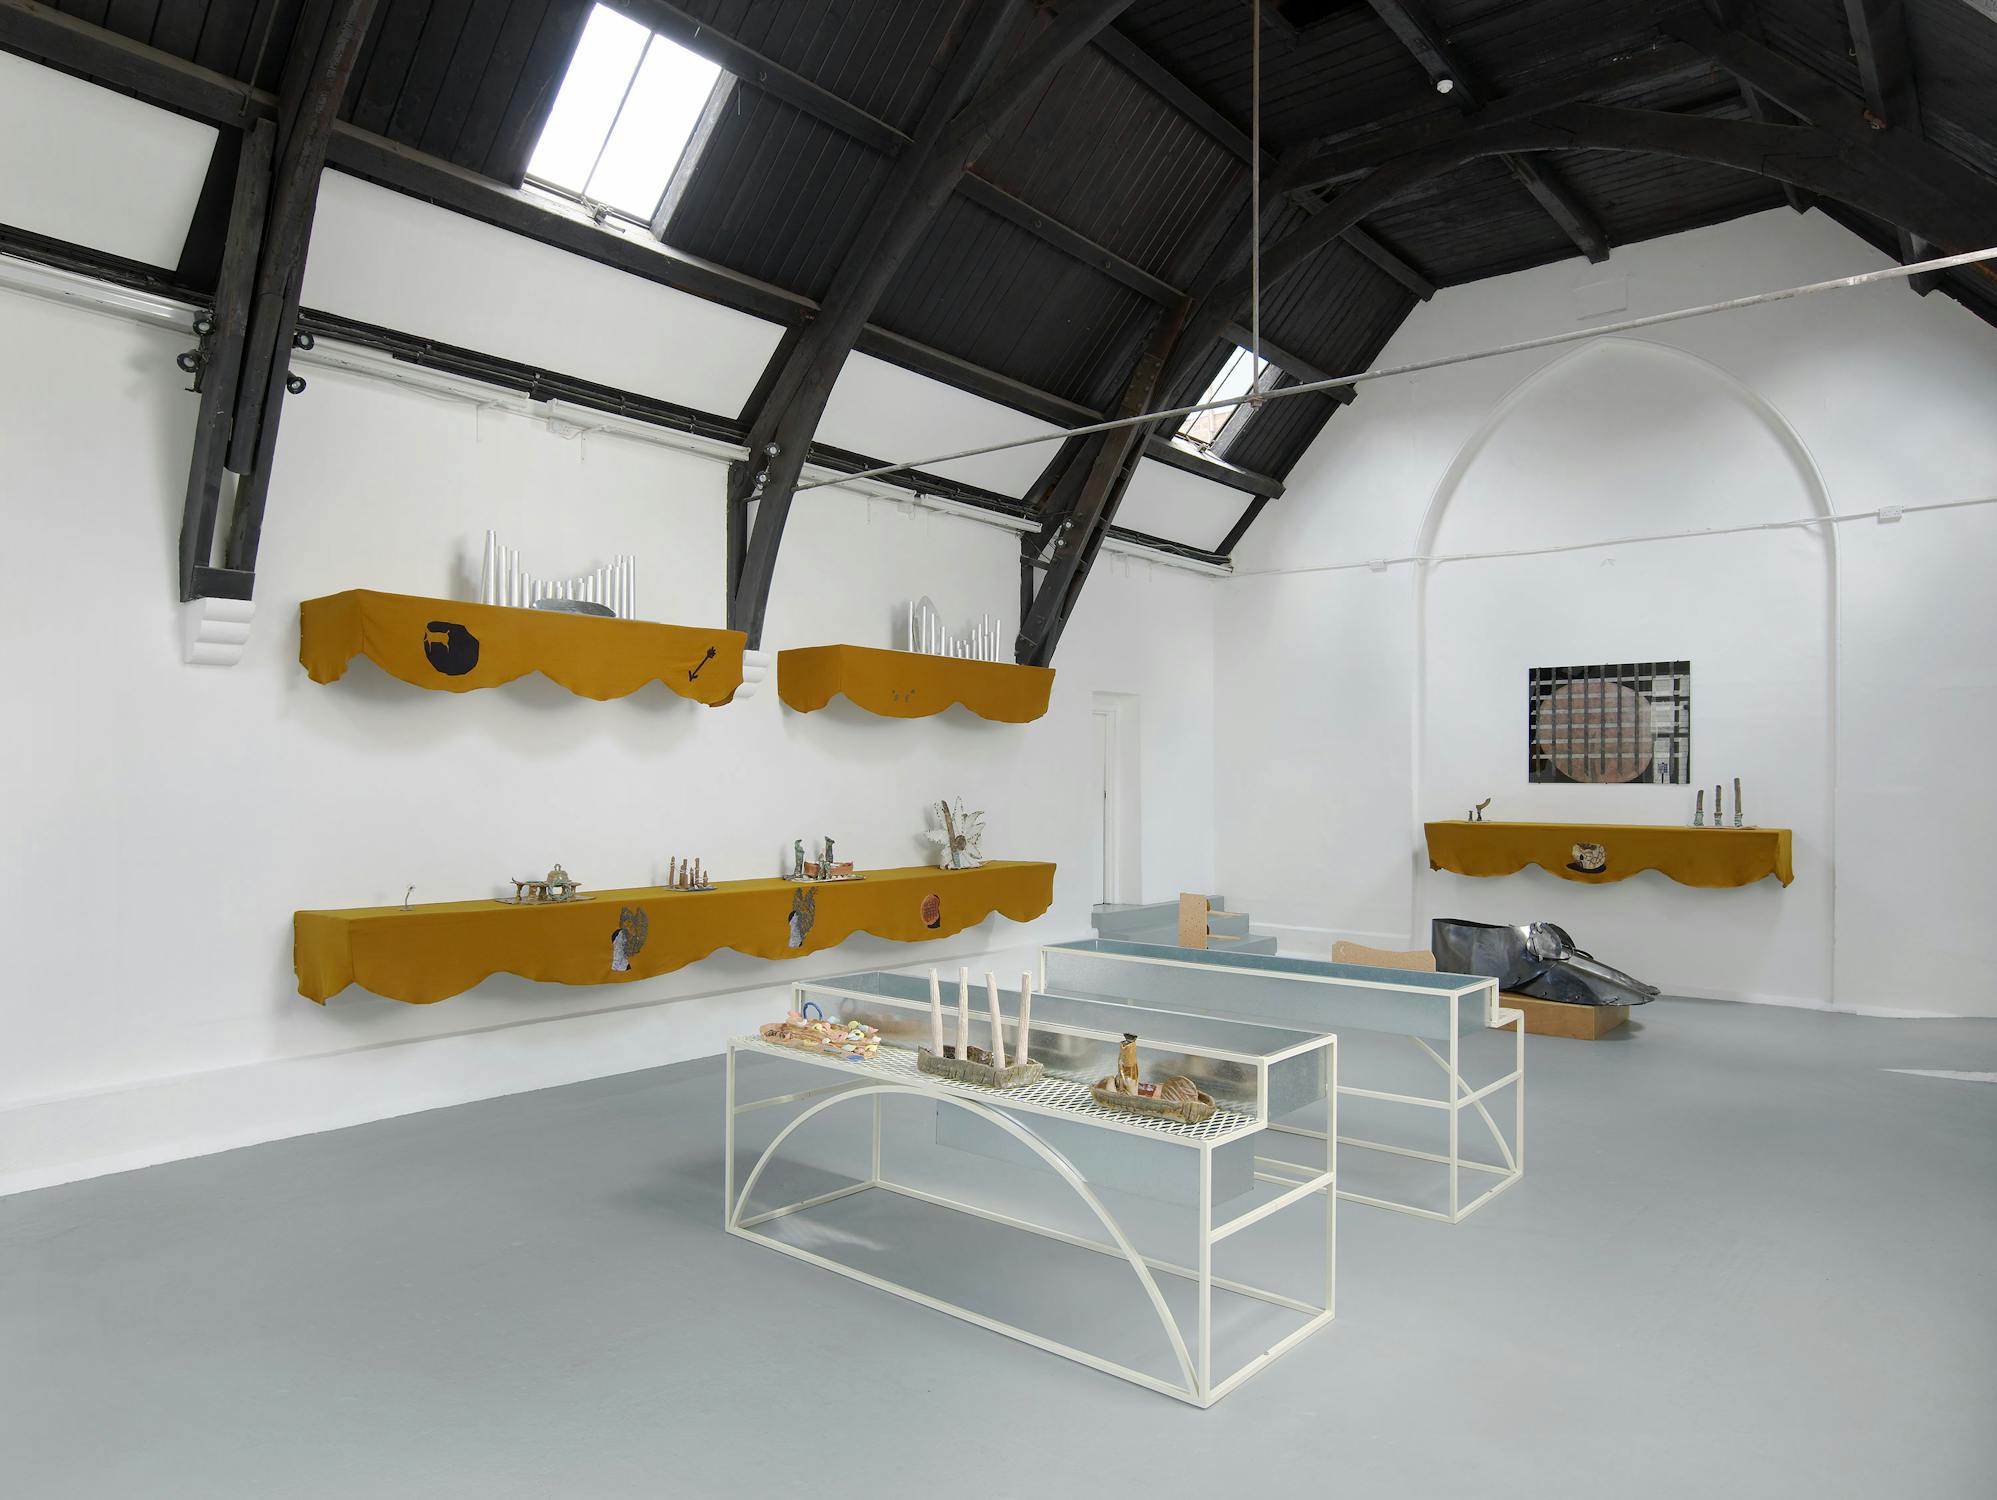 A gallery space with white walls and a grey floor. Shelves draped with mustard-coloured fabric are mounted on the walls, displaying various objects. Two white framed vitrines display different ceramic objects in the middle of the room.